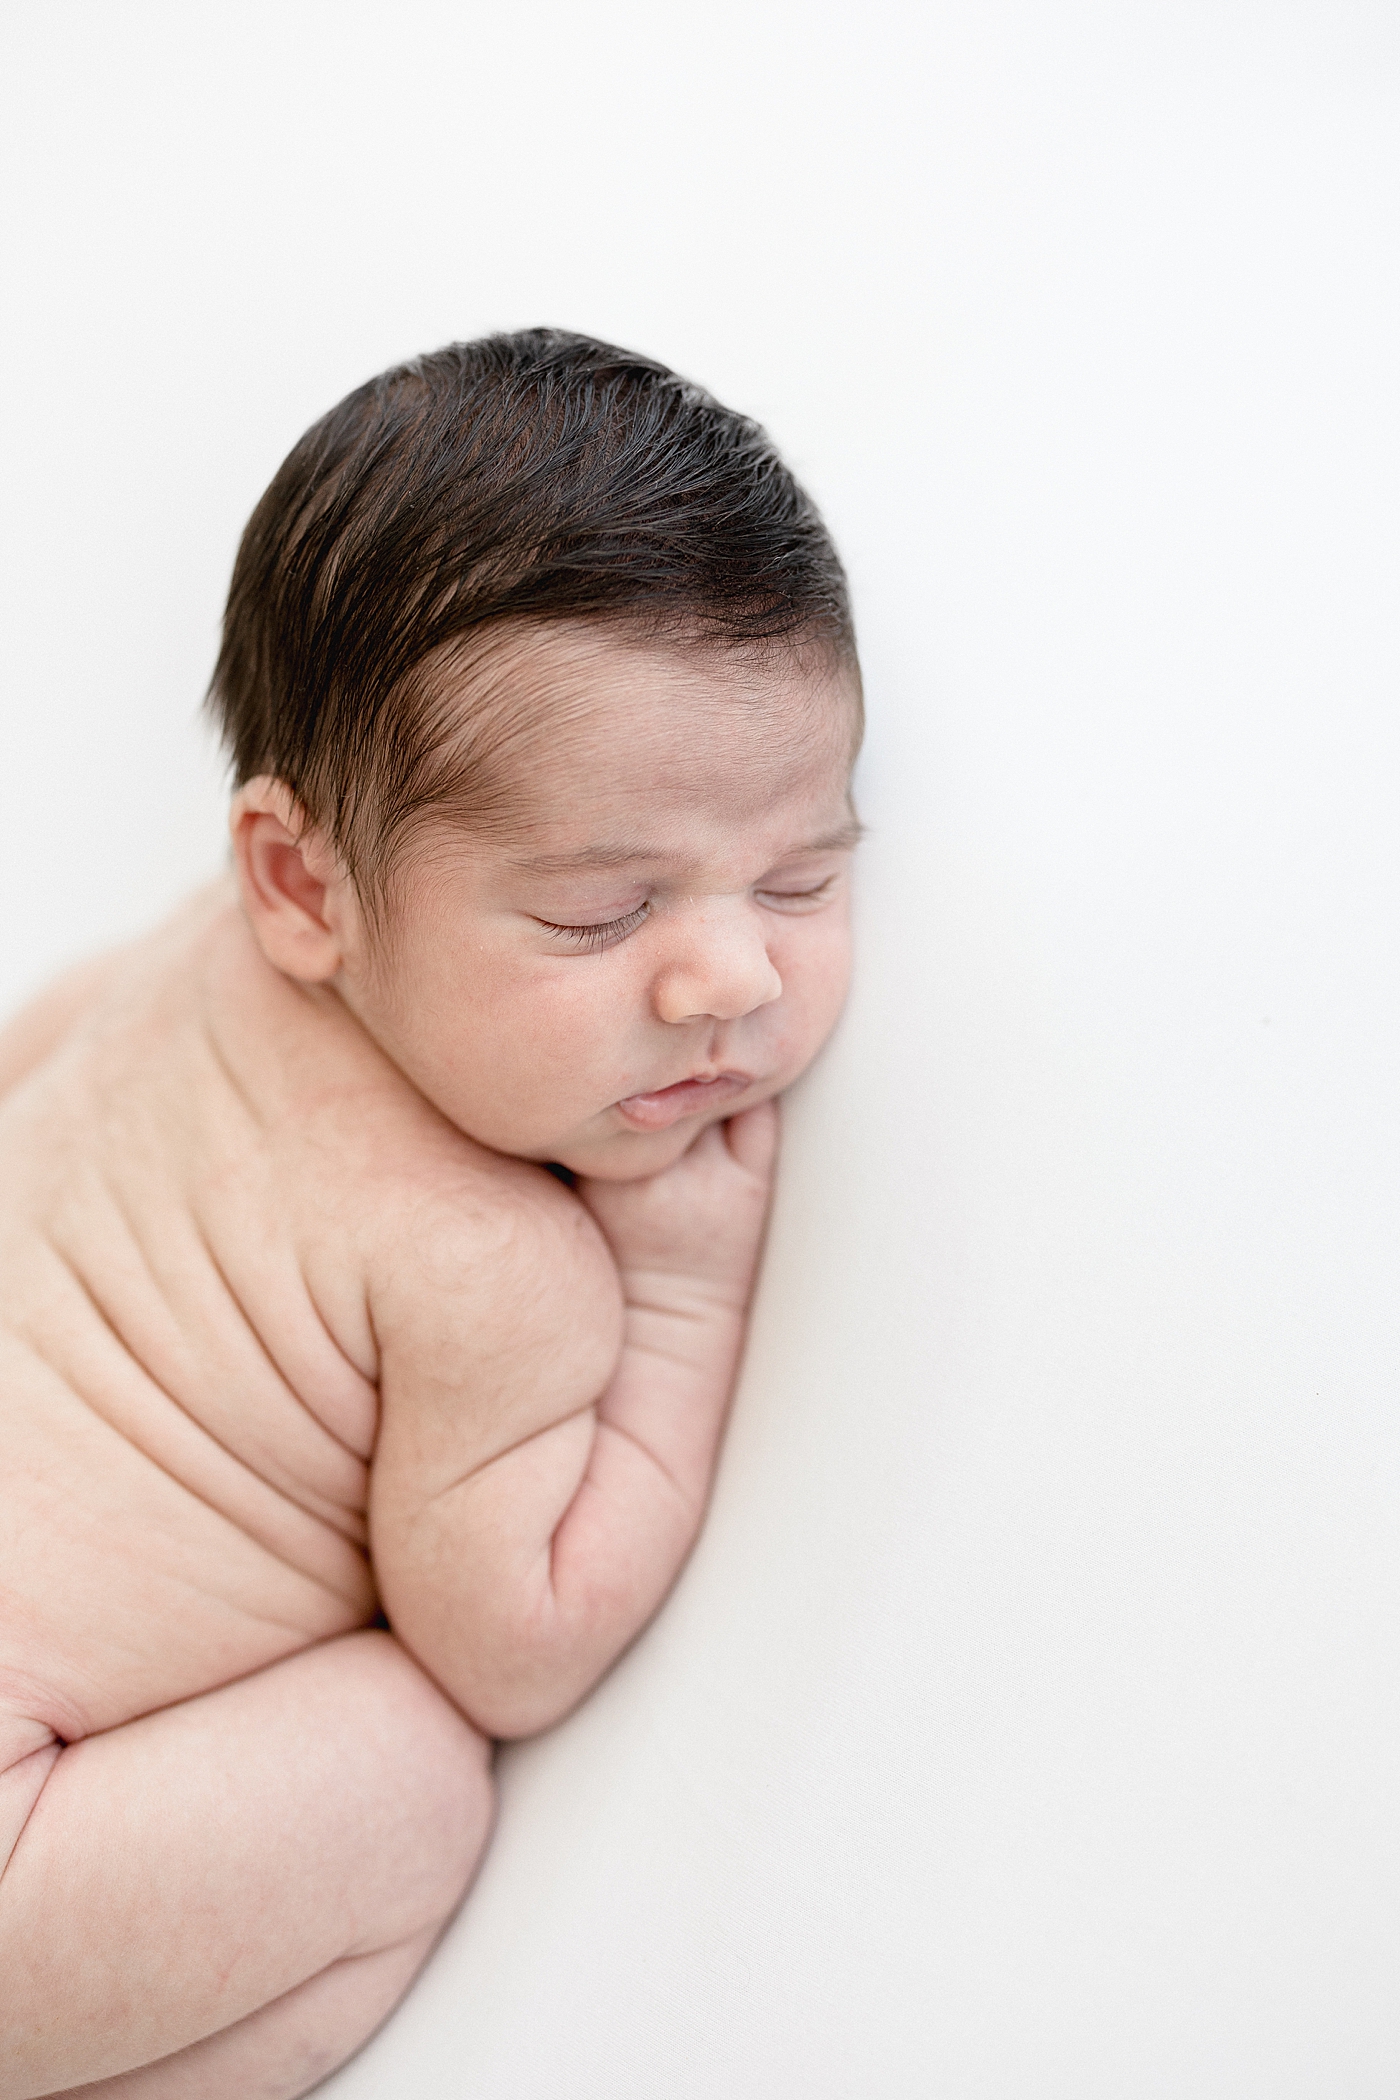 Baby led posing for newborn session. Photo by Brittany Elise Photography.